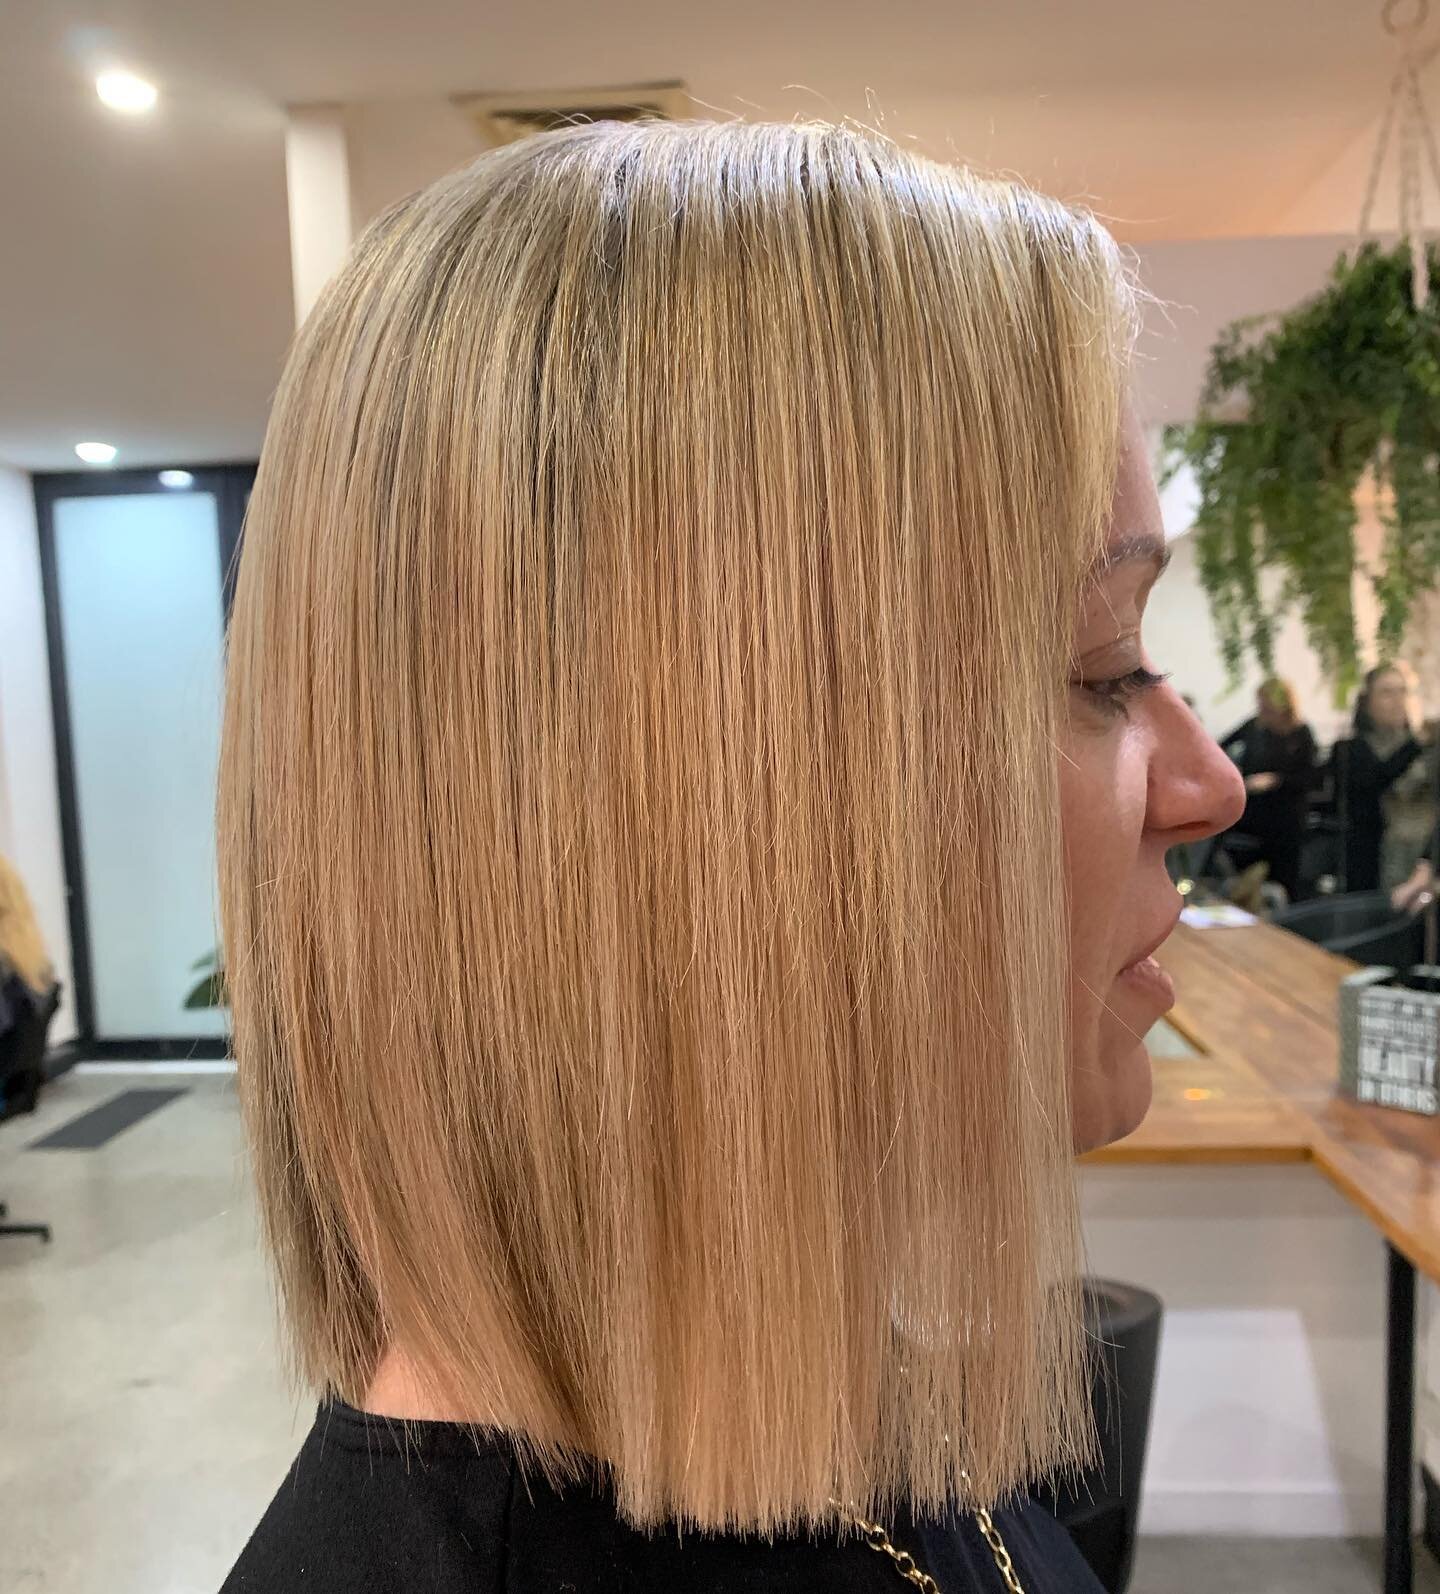 Filling out corners with #tapeextensions is the easiest way to create a fuller look around the face. Swipe for before ➡️➡️